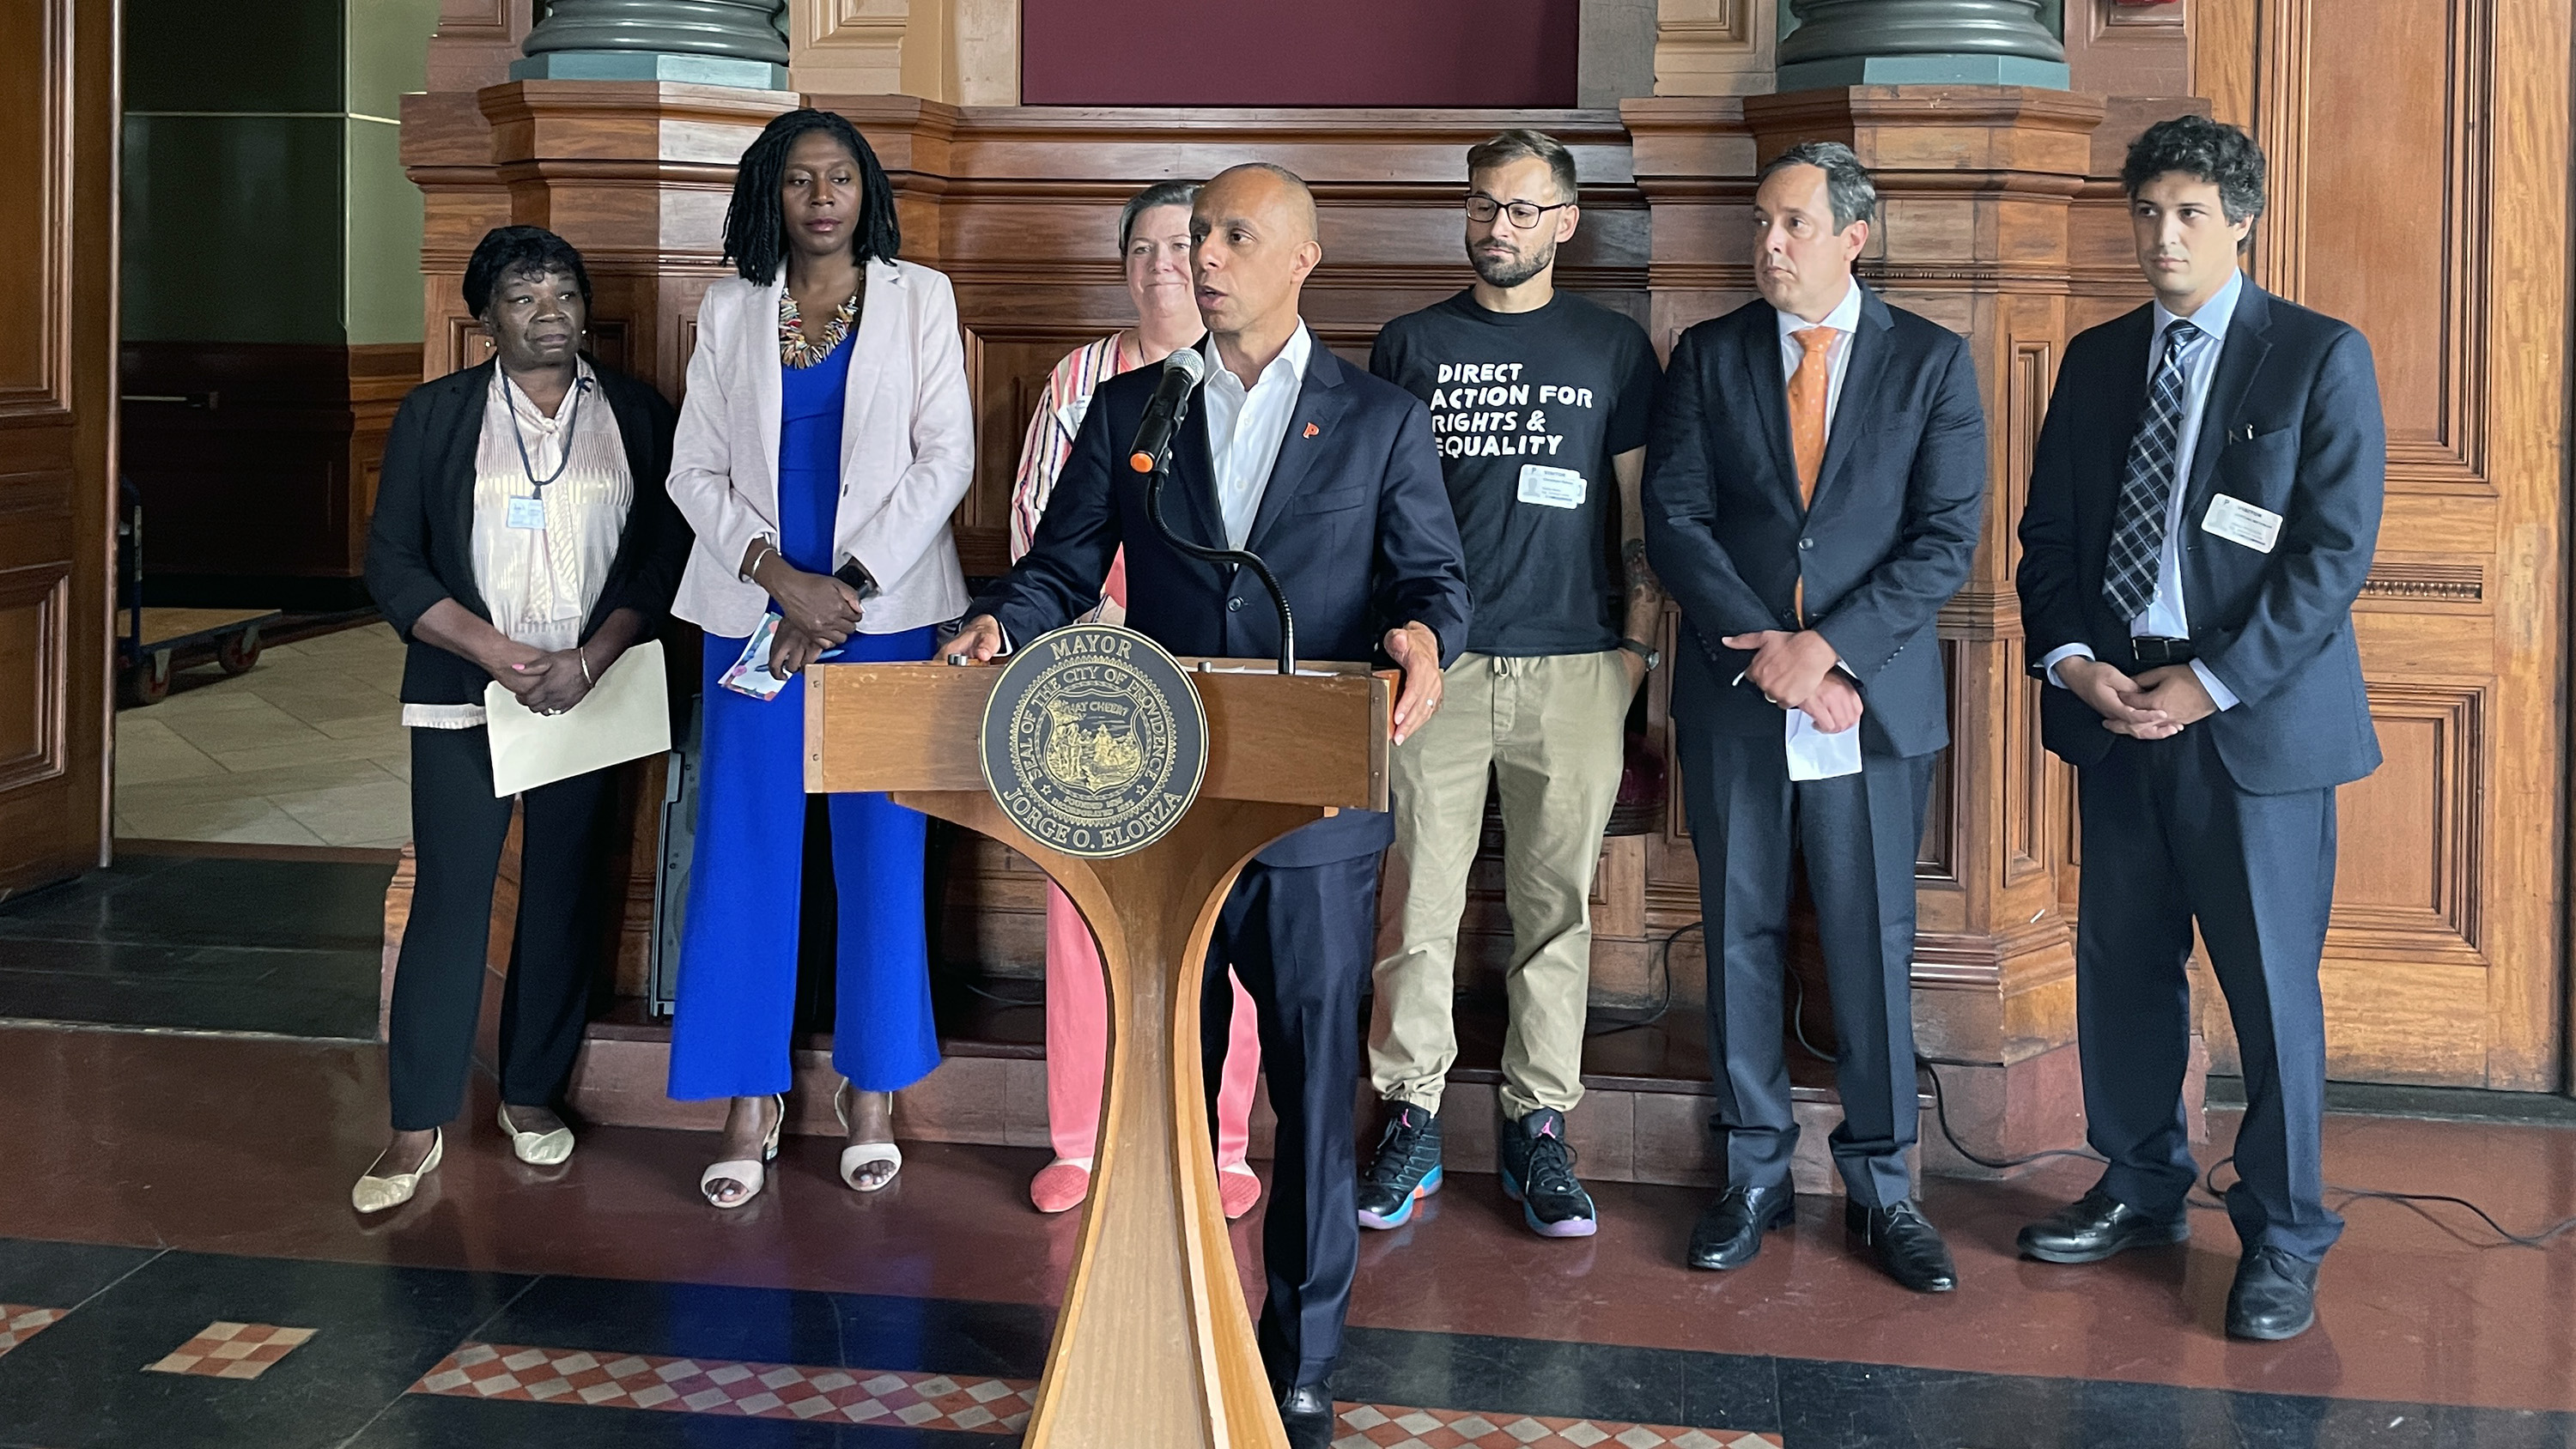 Mayor Jorge Elorza announces a new eviction defense program for low-income renters in Providence. The effort is a collaboration between the city, legal services, and research and advocacy groups.